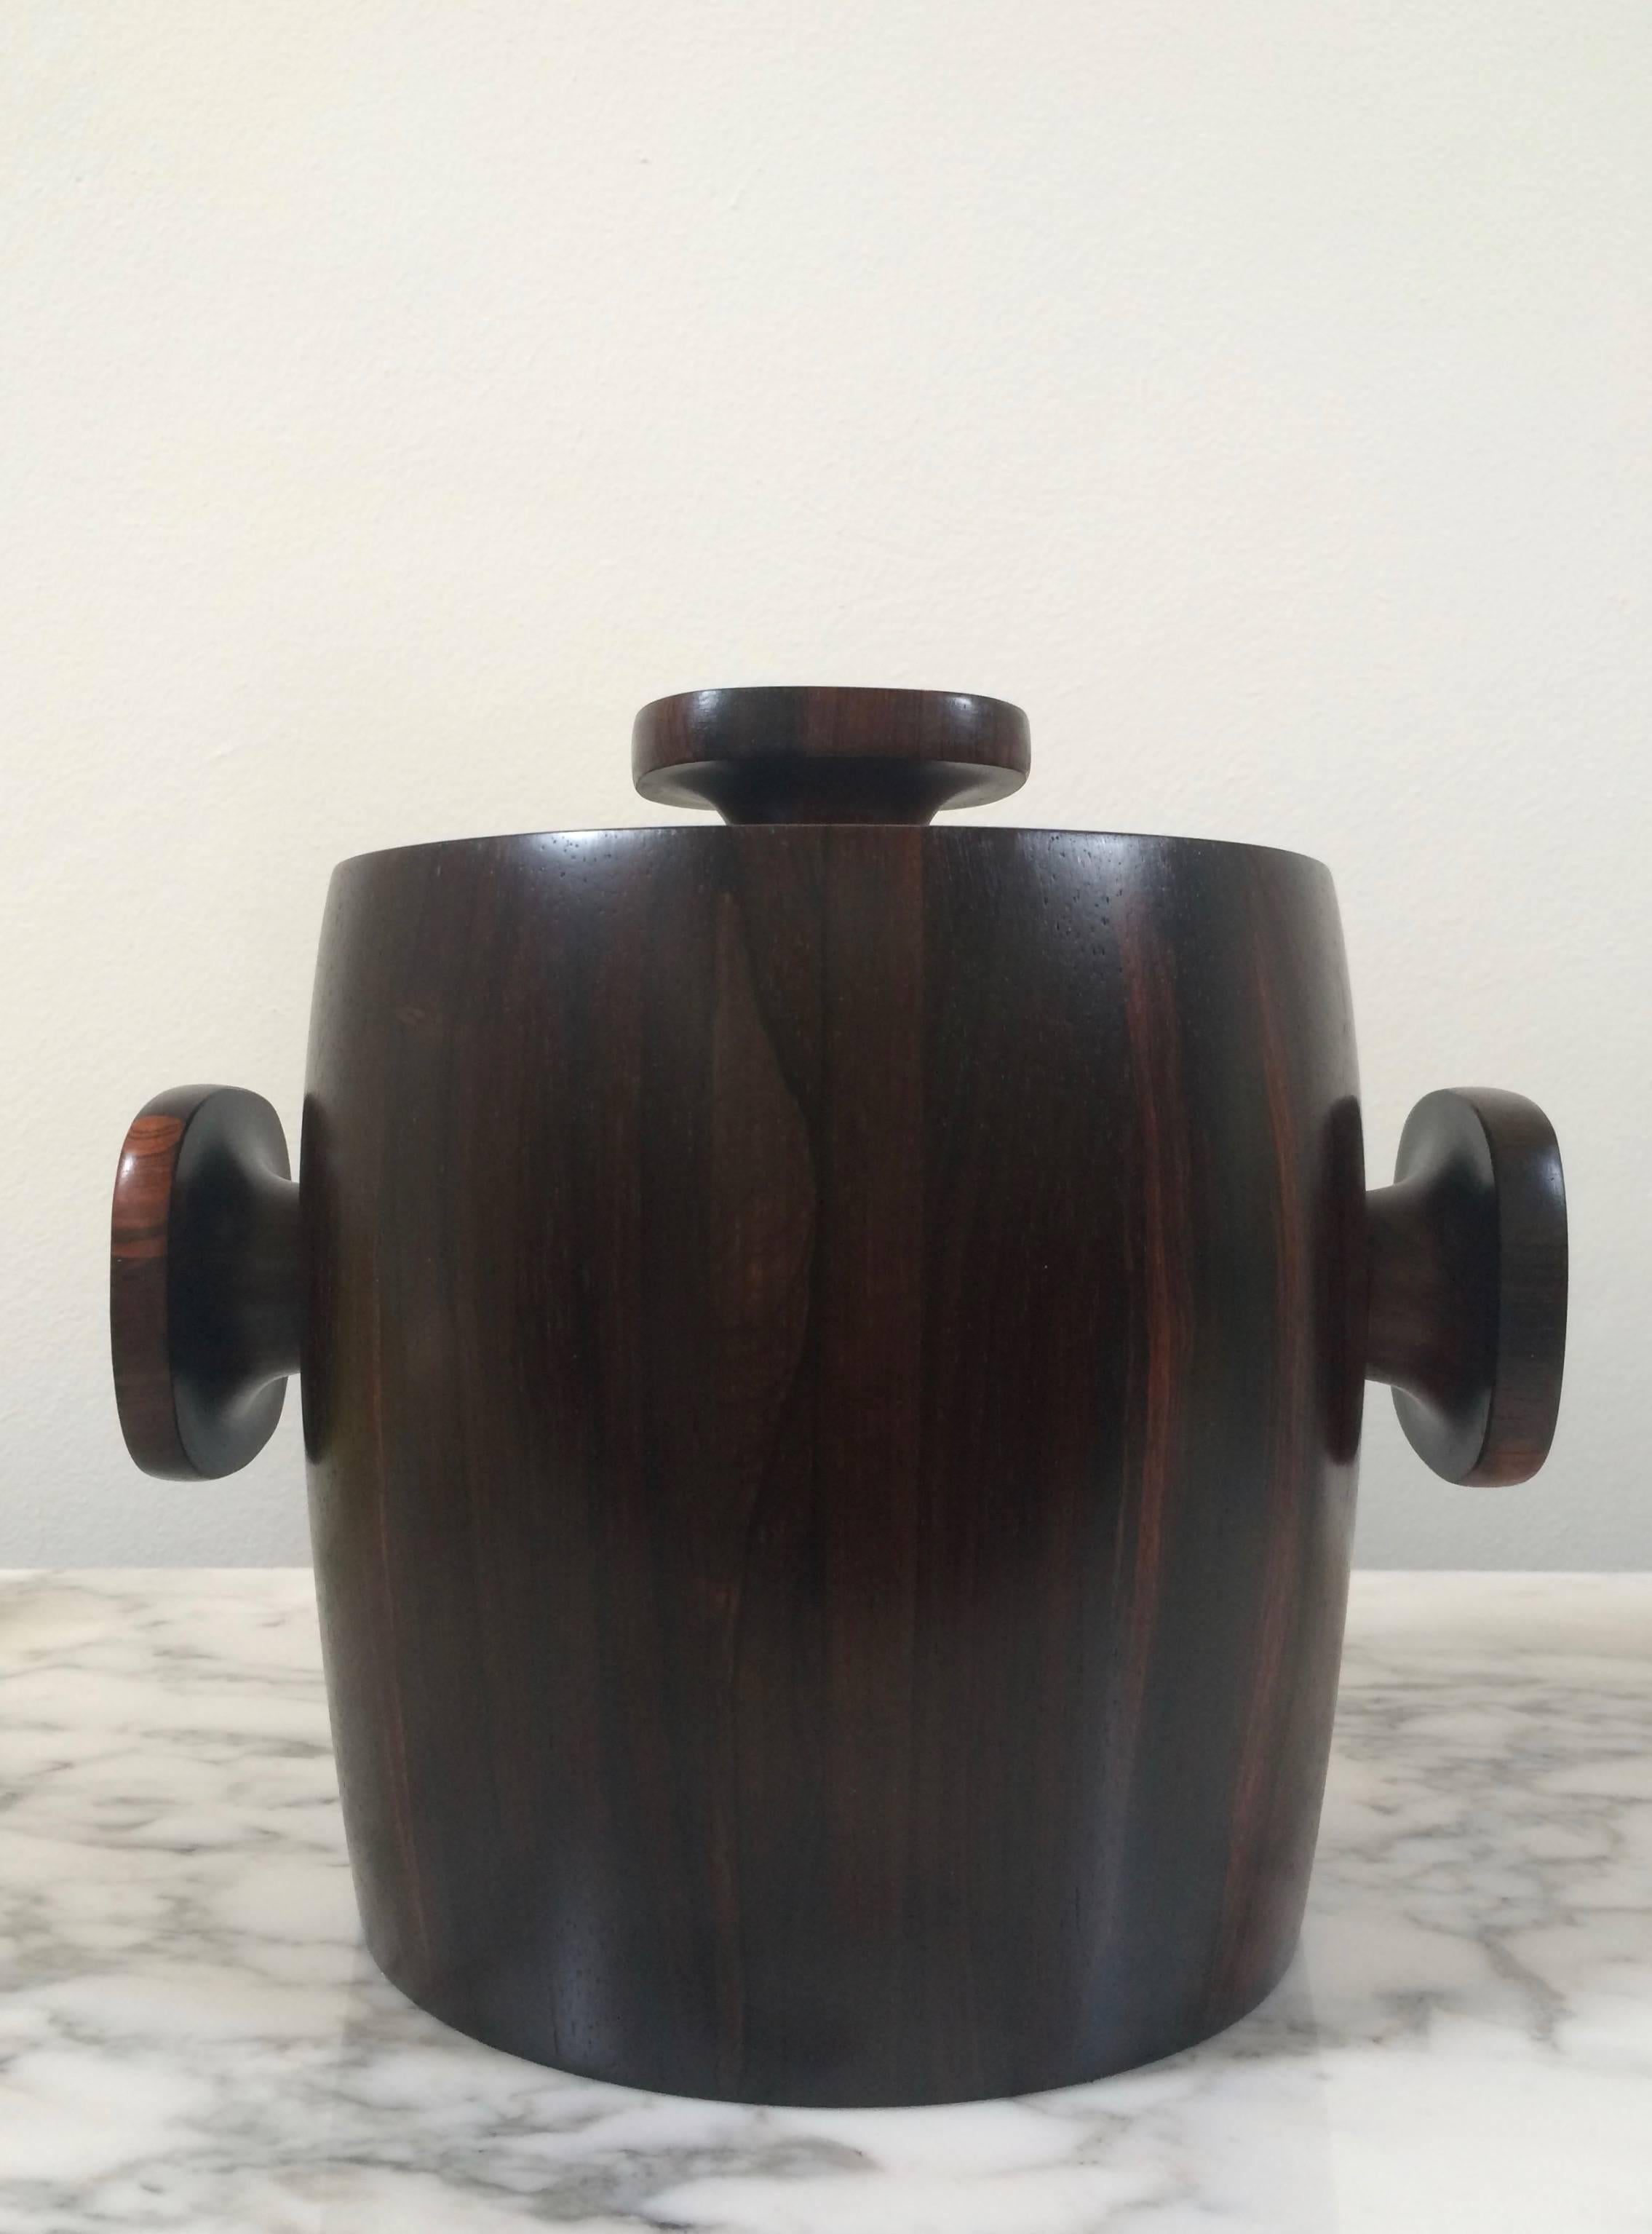 Collectable solid jacaranda wood ice bucket with distinguished large oversized handles, designed by Jean Gillon for the Brazilian company Italma Wood Art in the 1960s in magnificent condition.